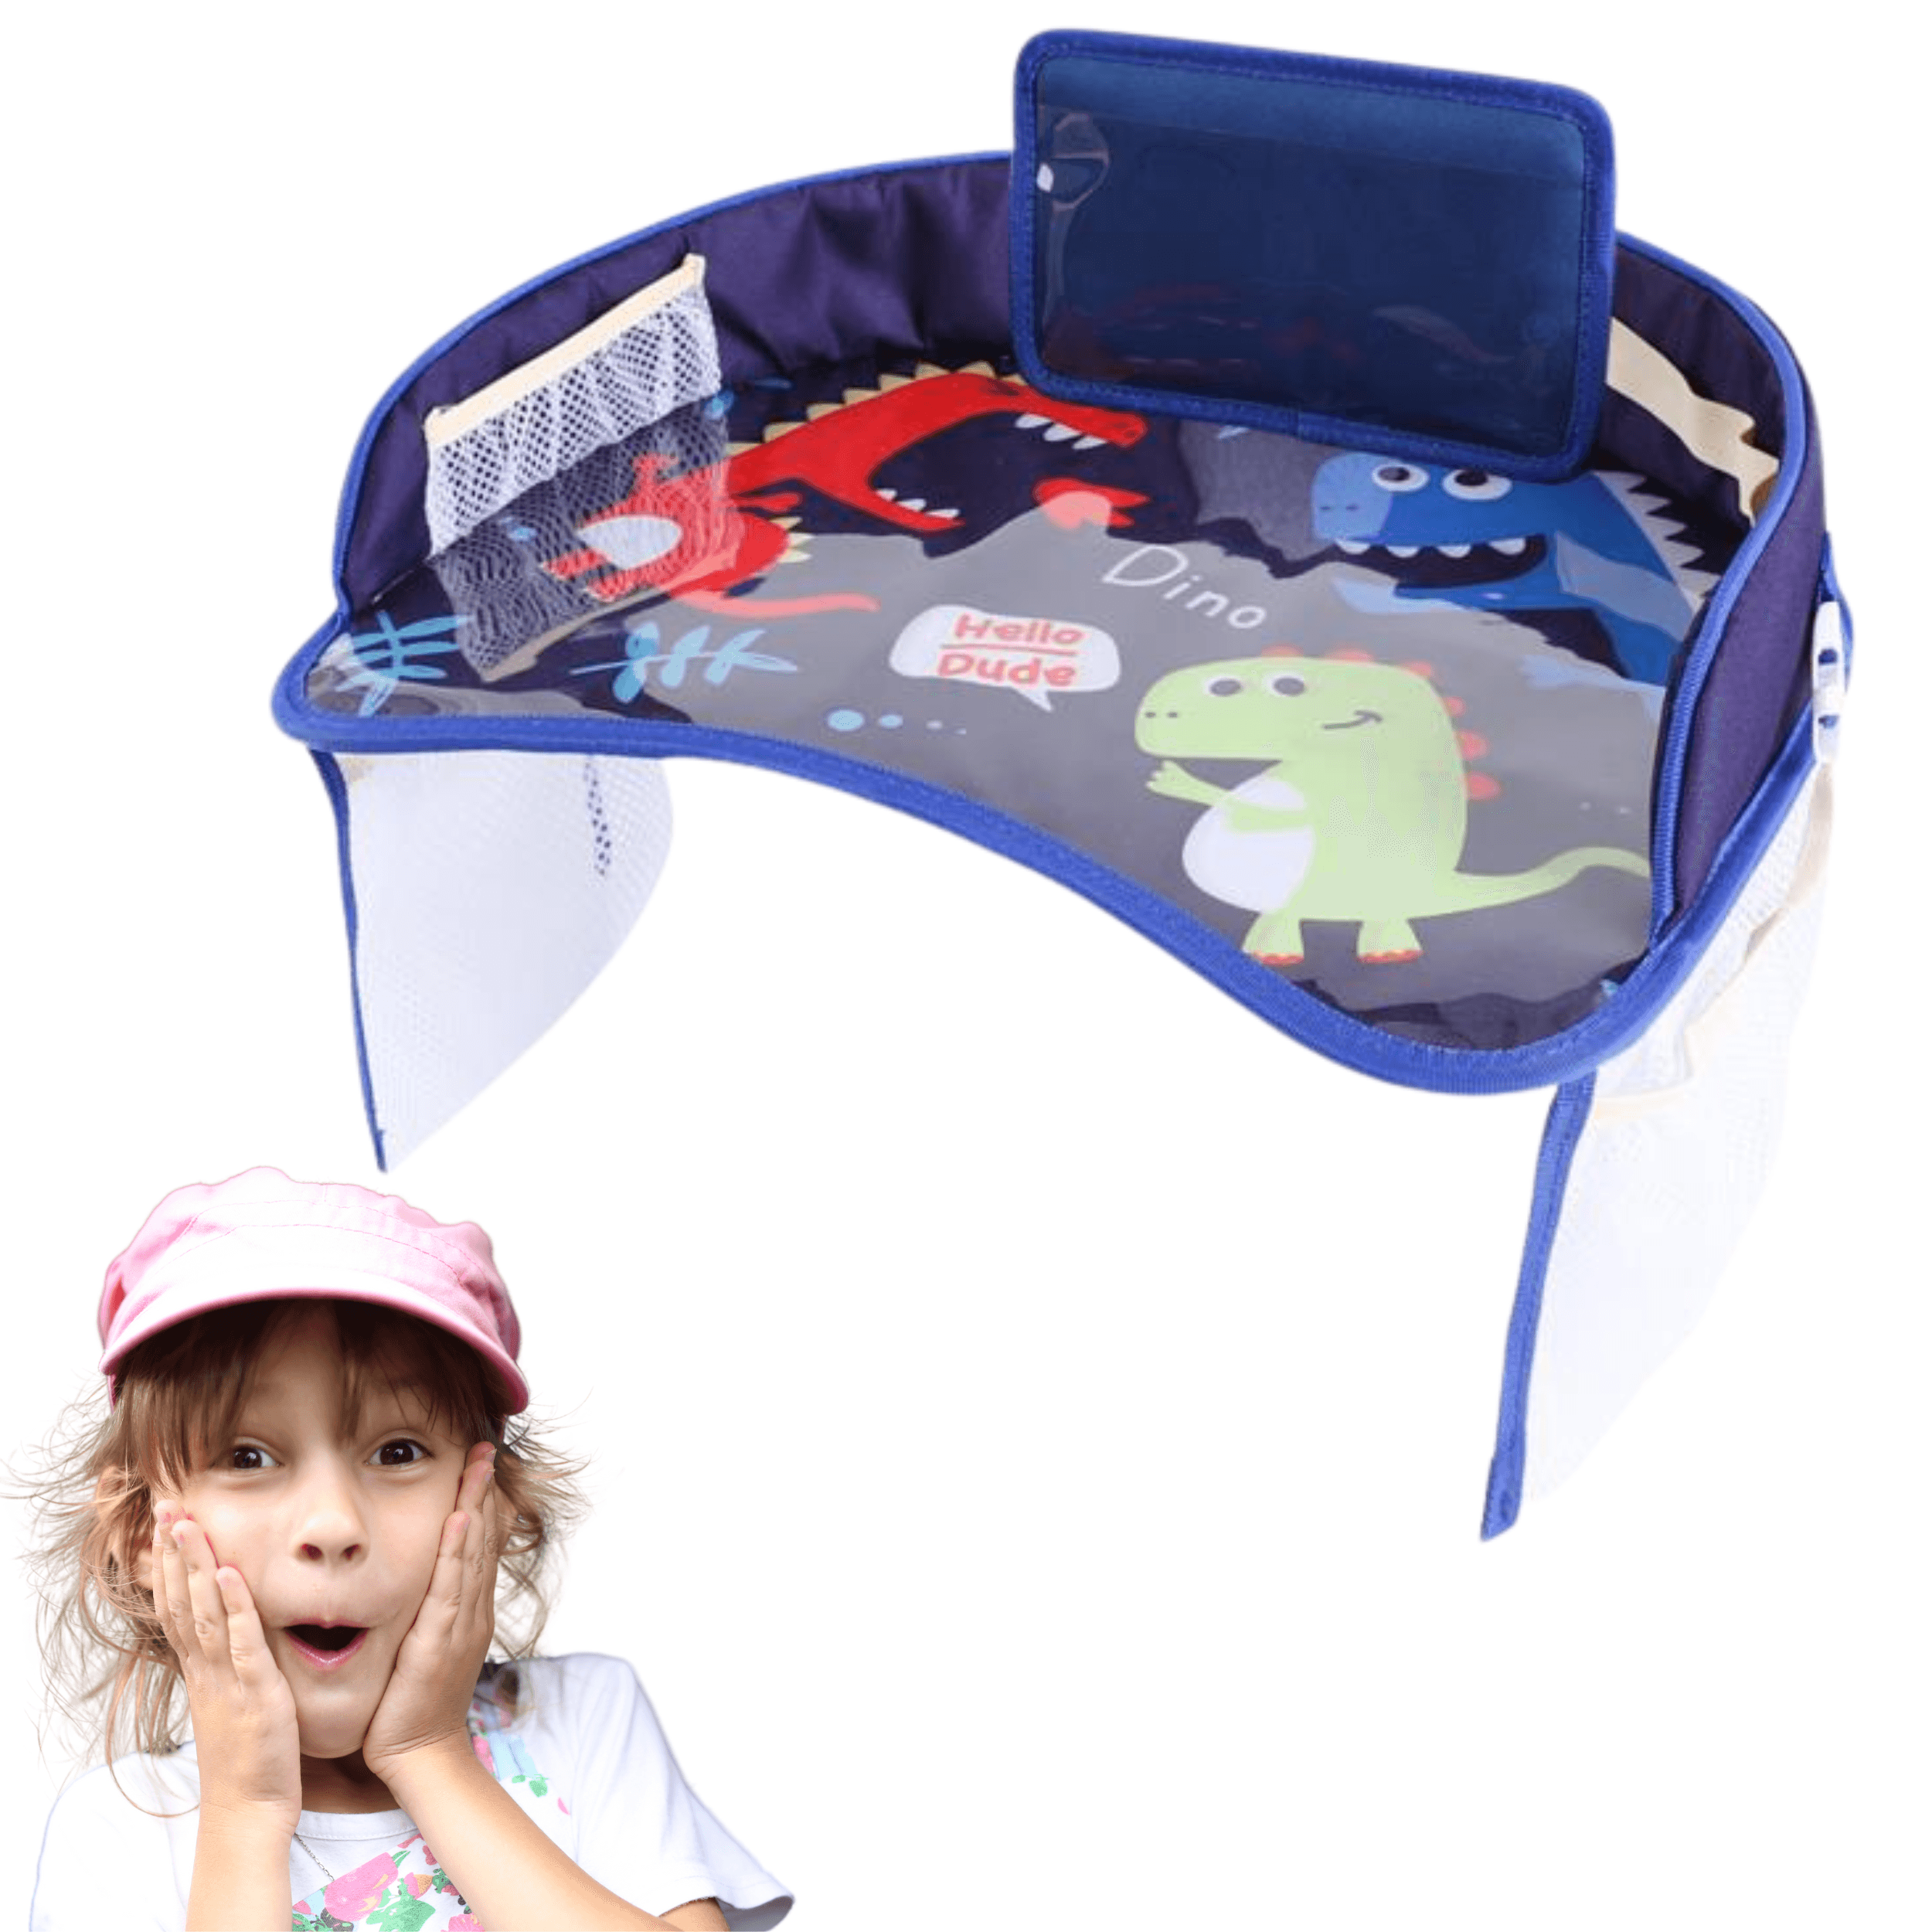 Travel table for children in the car seat "Dinosaur"